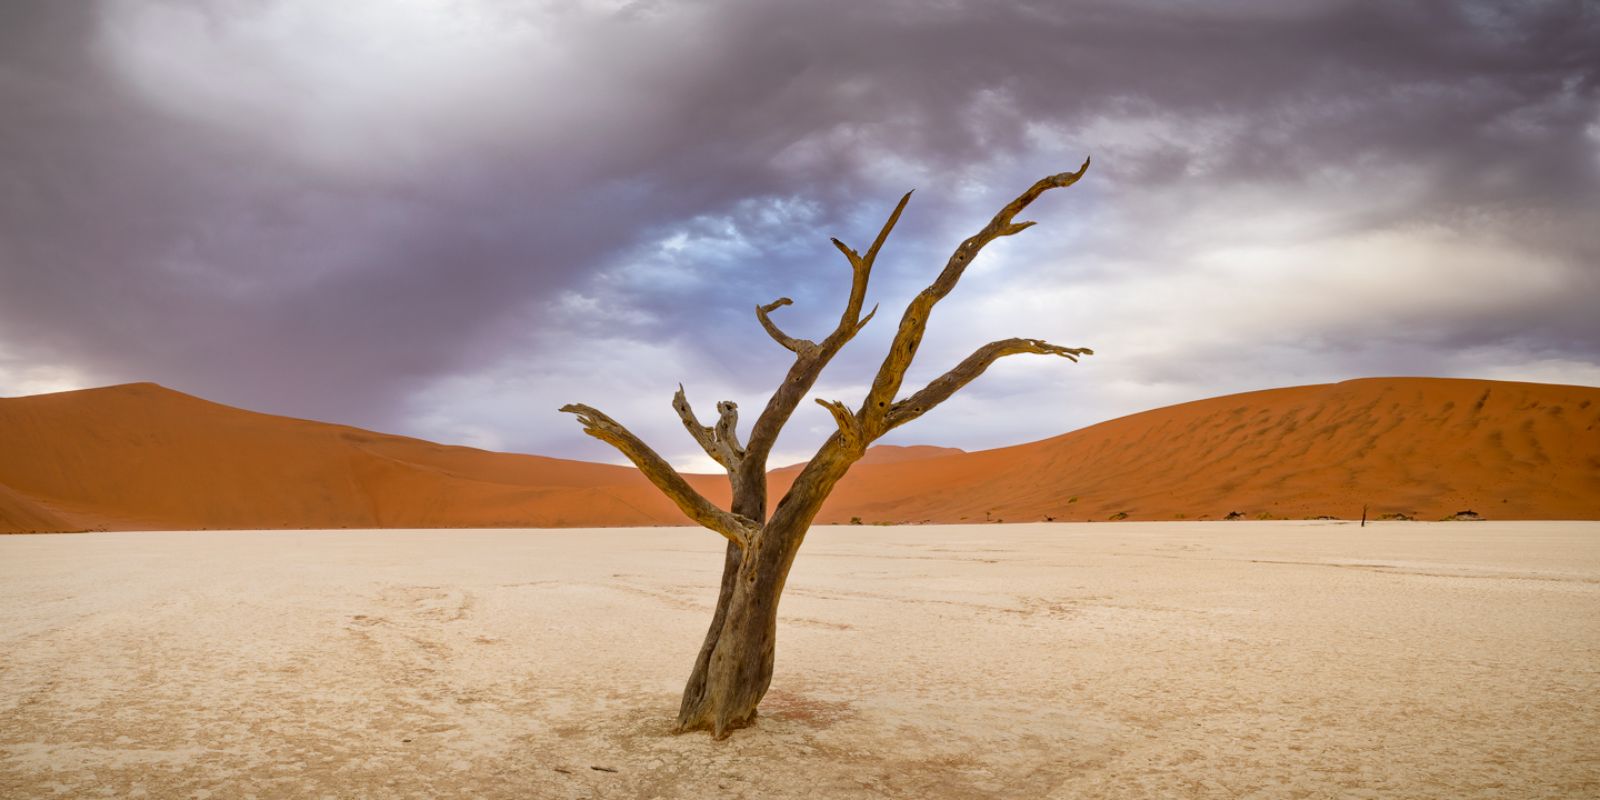 a lone tree stands in the middle of a desert